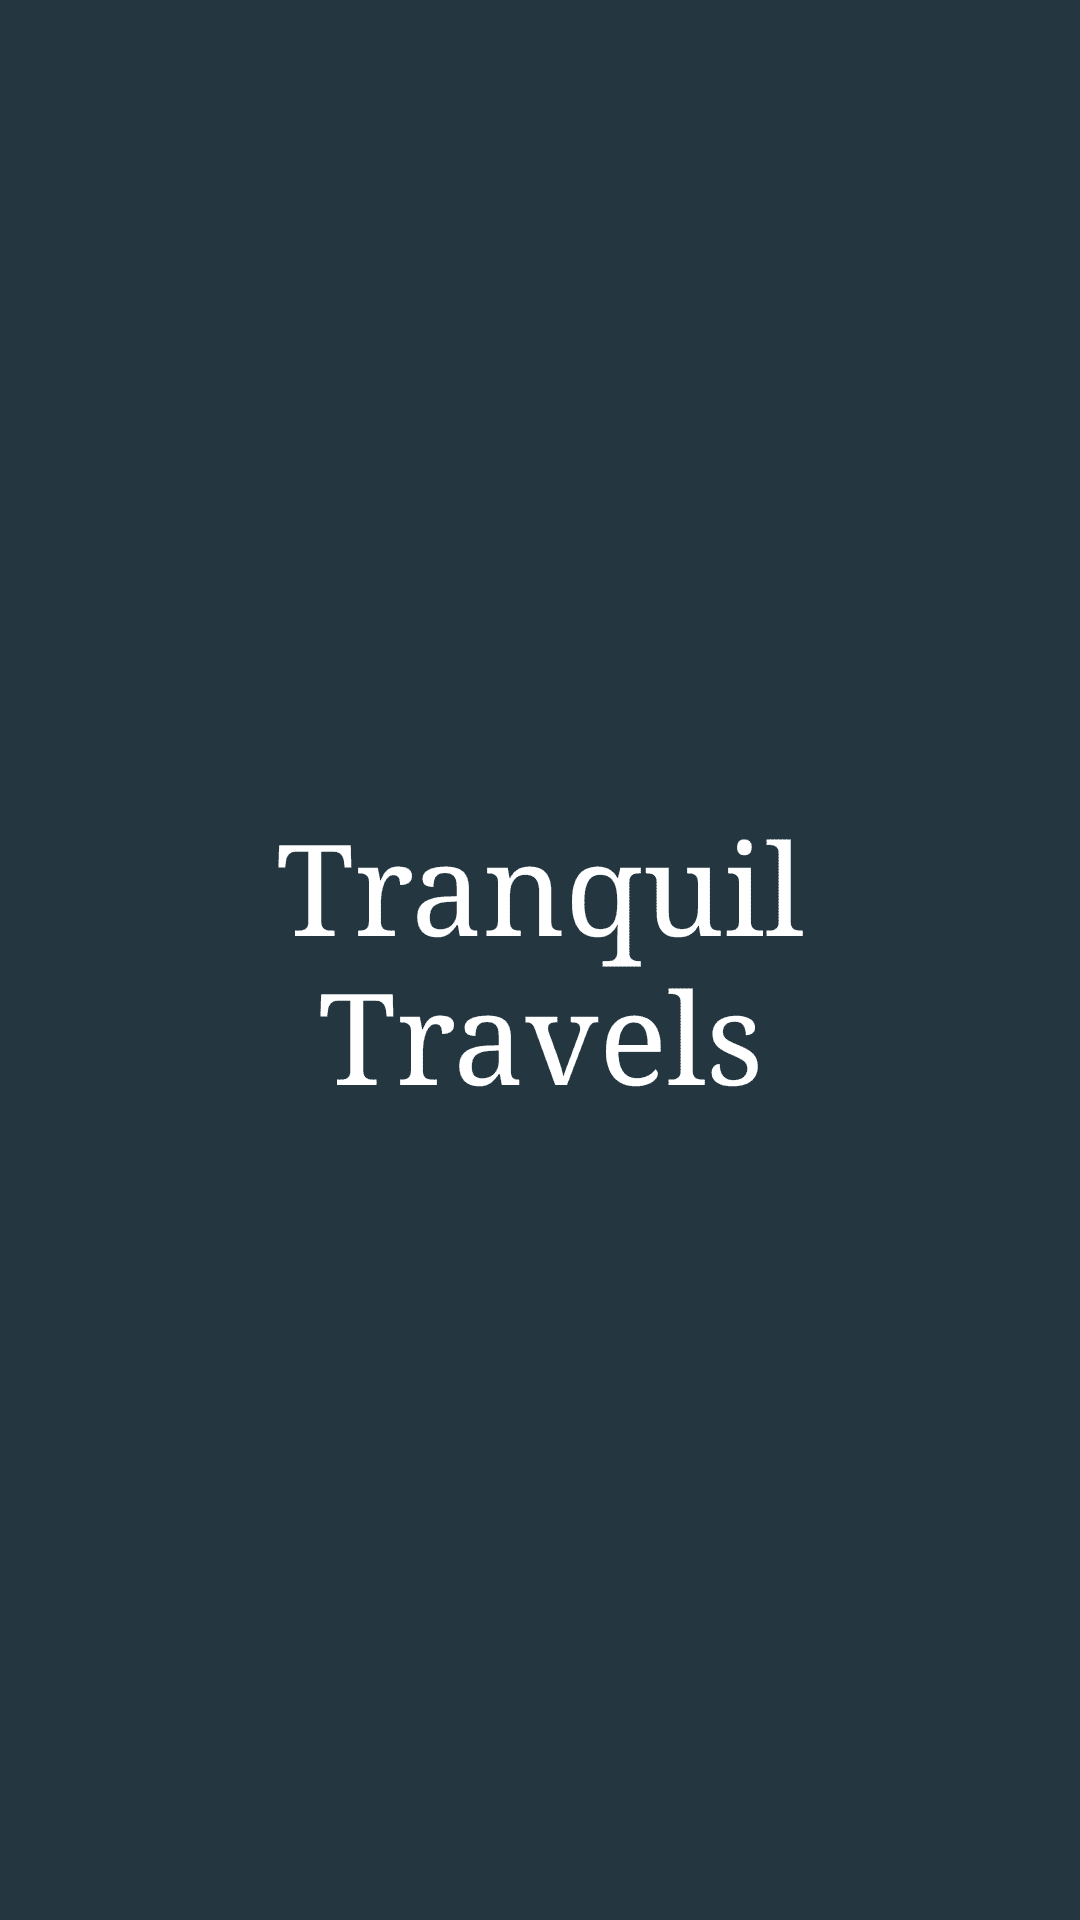 Tranquil Travels